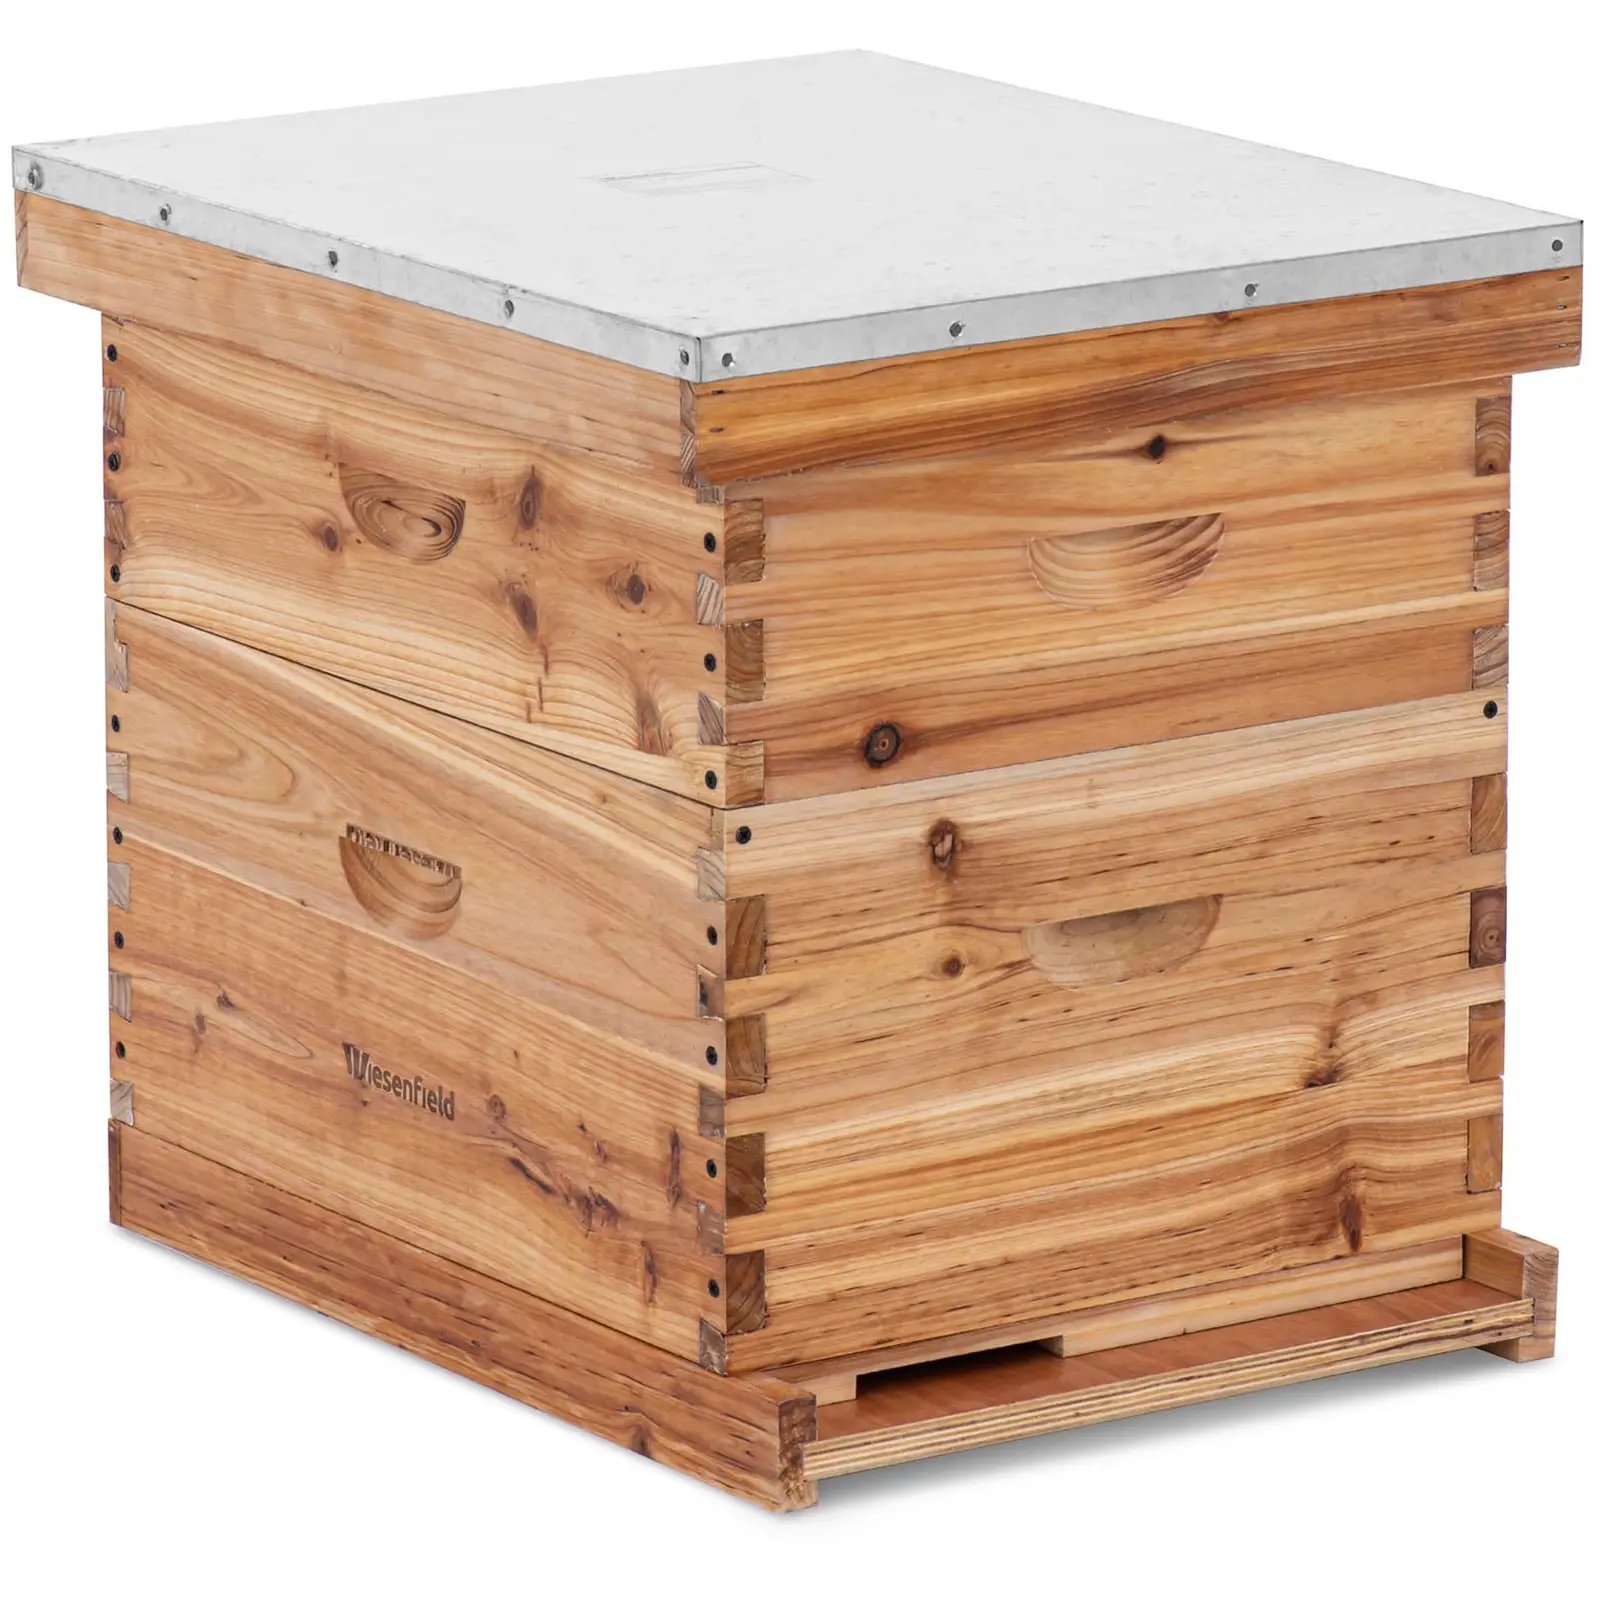 Factory second Langenstroth beehive–2 frames and base cassette with entrance hole